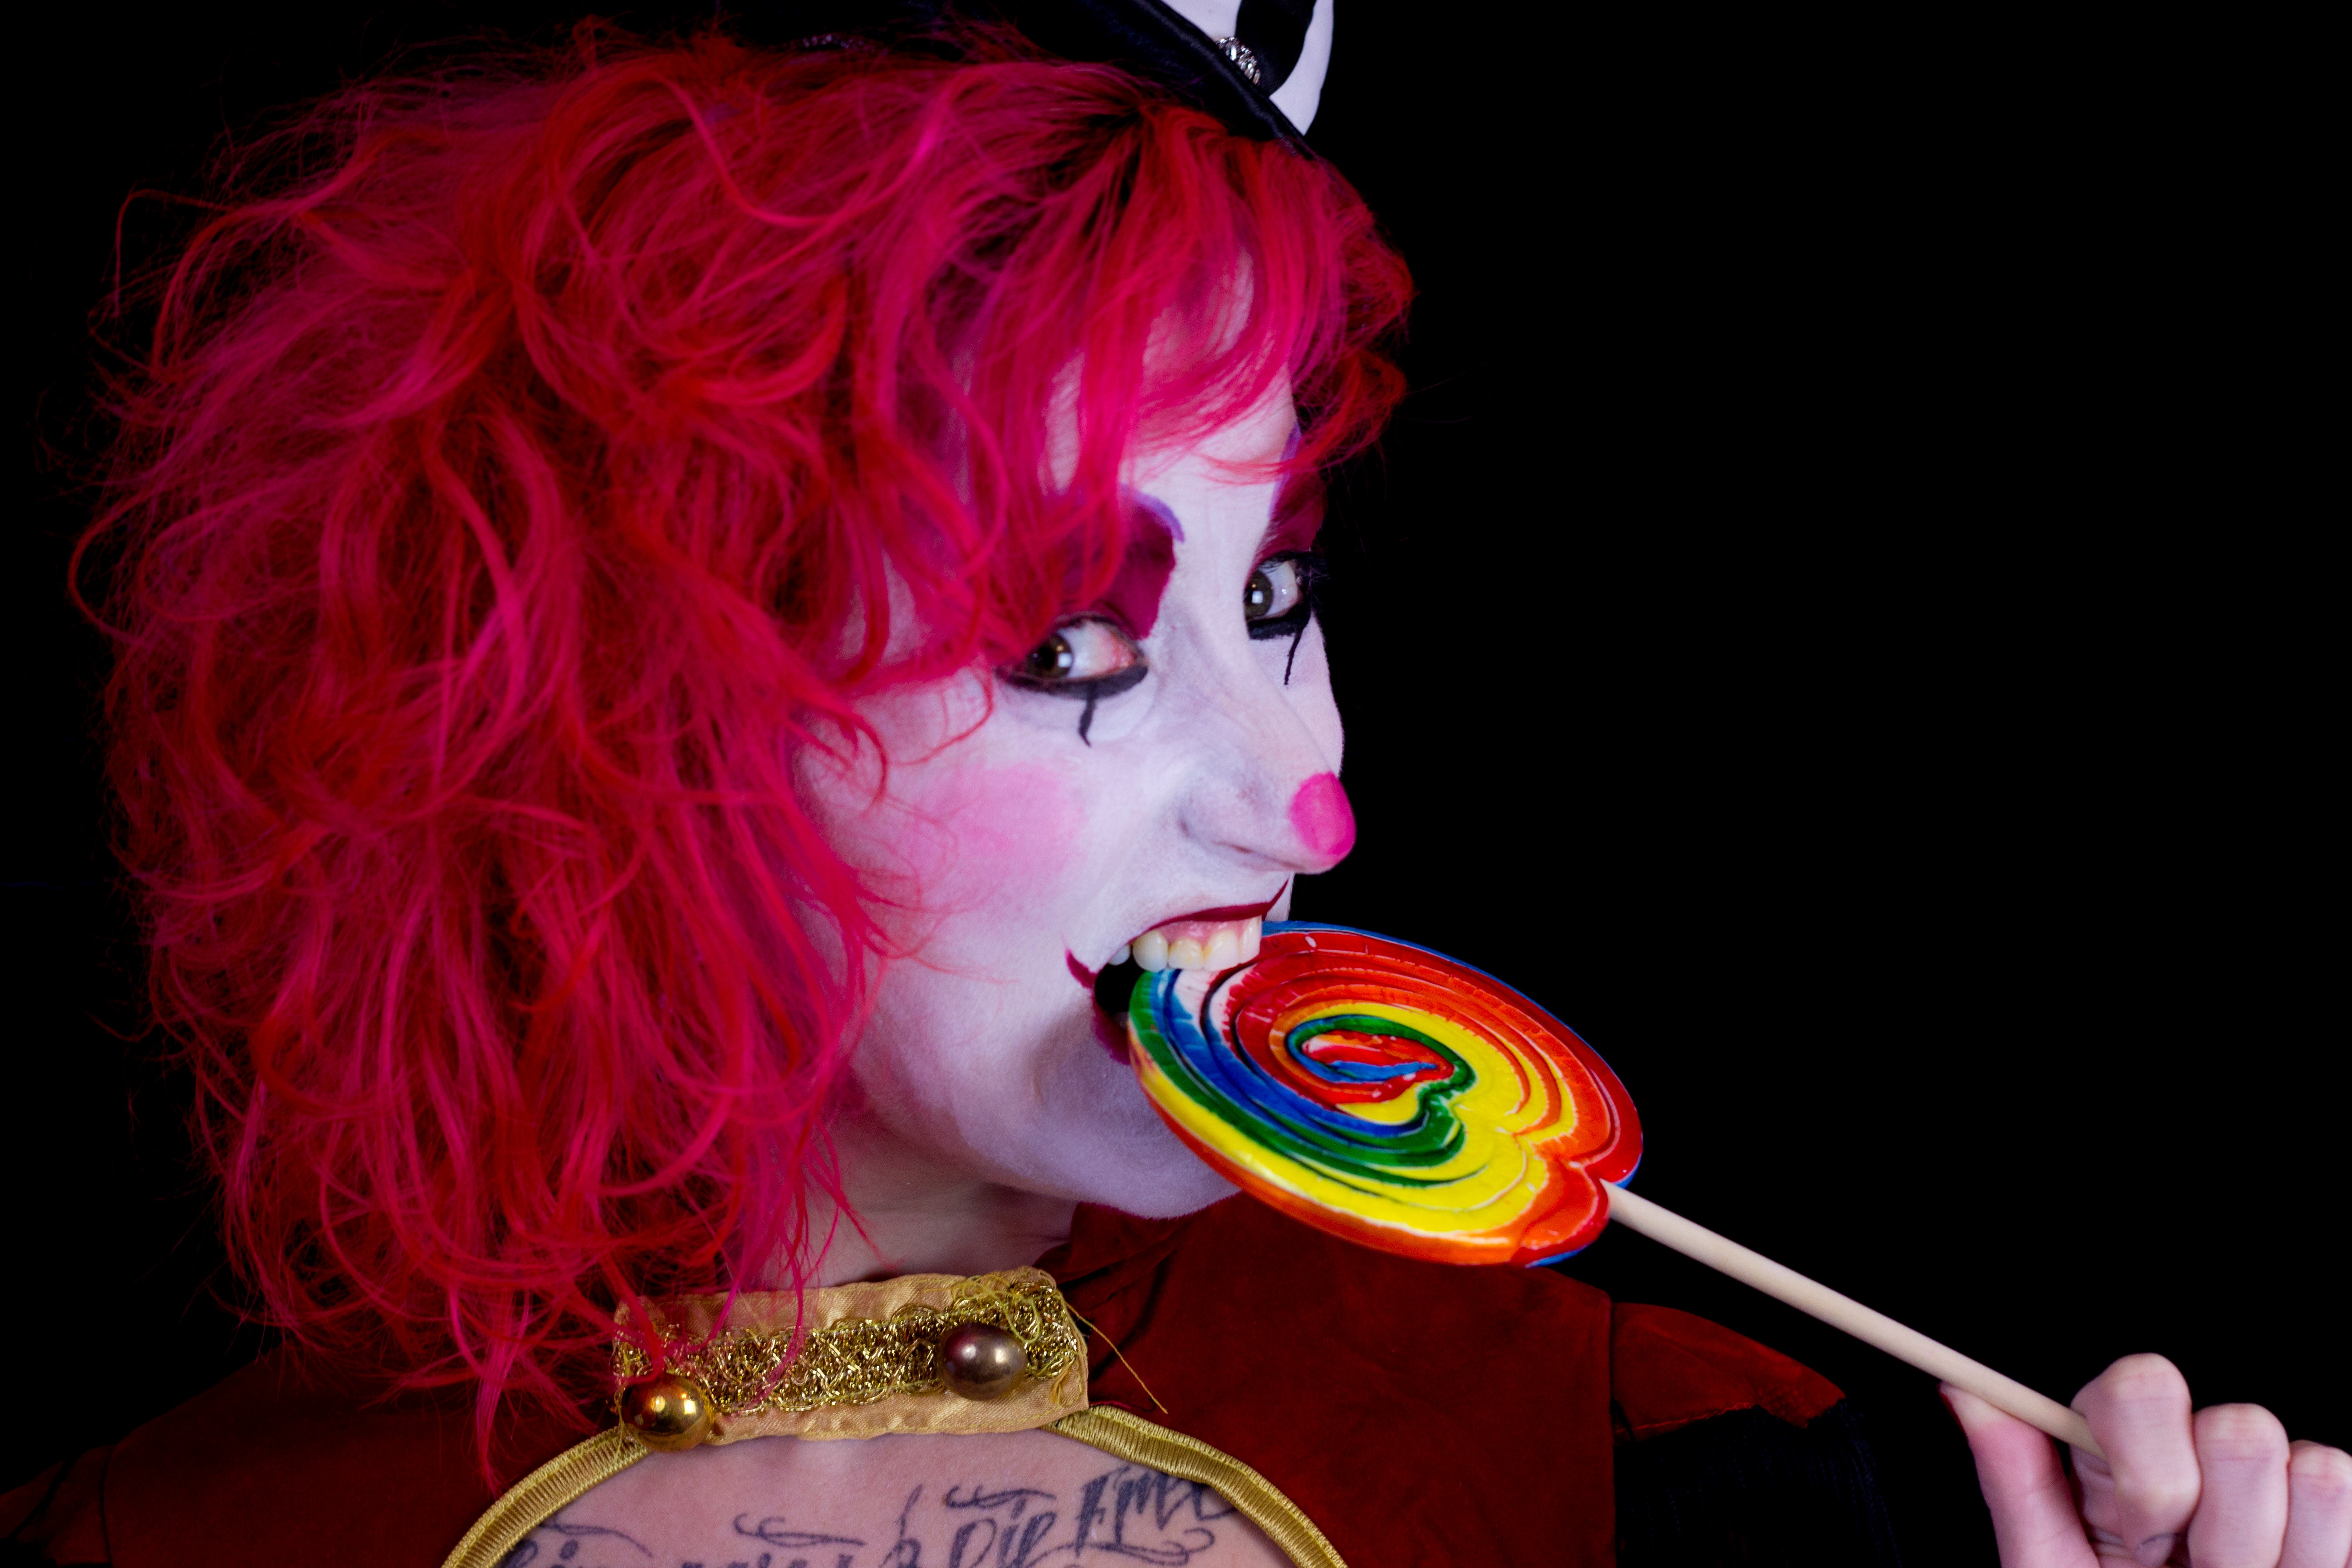 I Love Clown Porn - Inside the Kinky, Brightly Colored World of Clown Fetishists